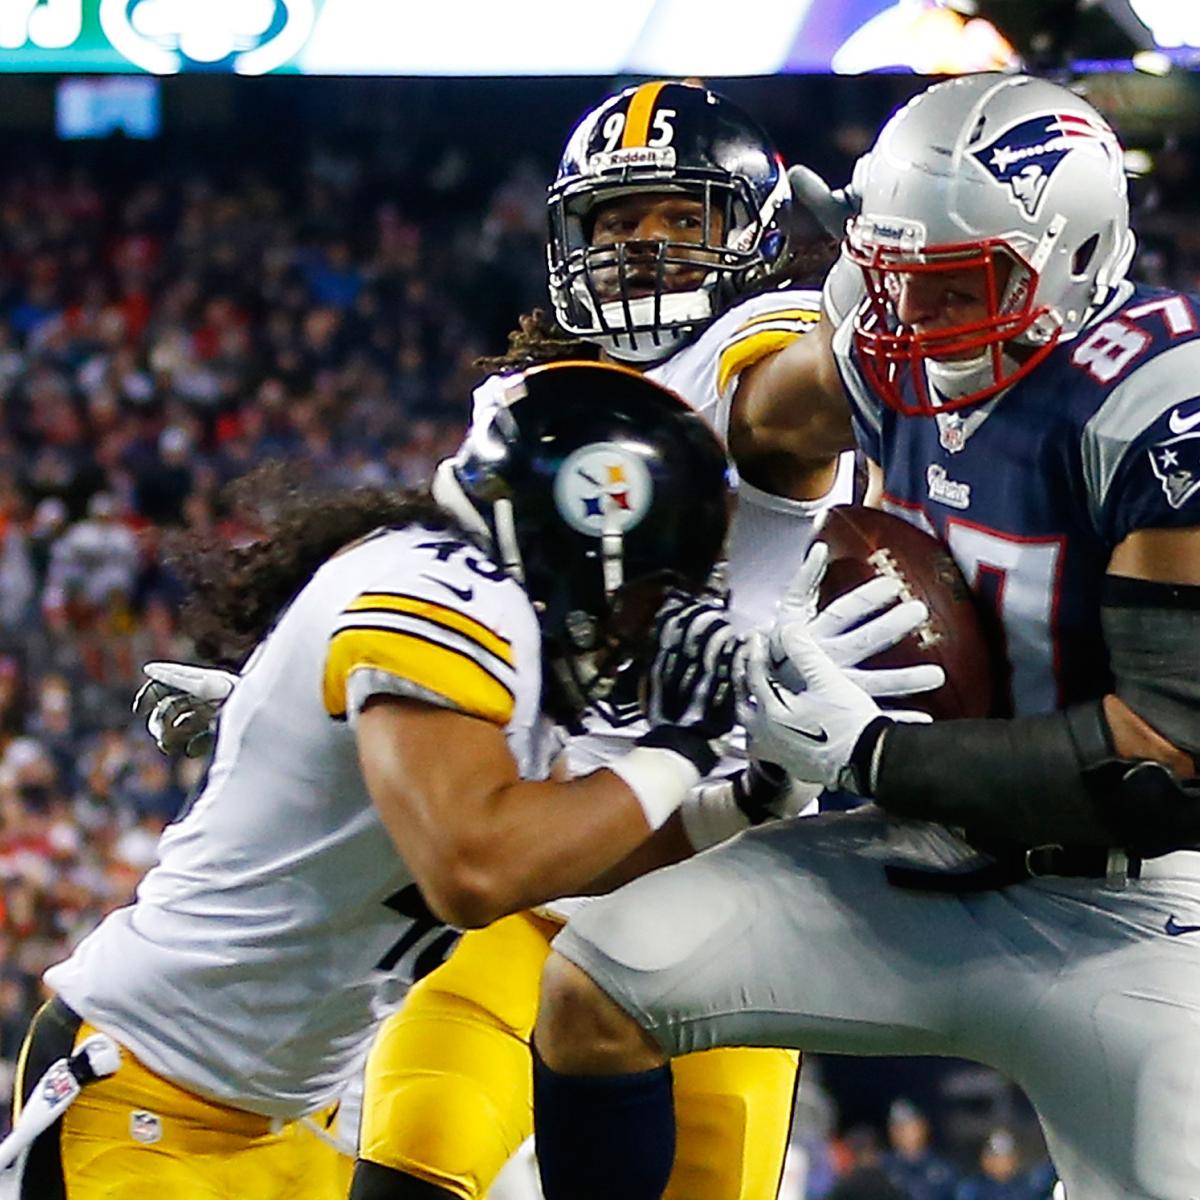 Pittsburgh Steelers vs. New England Patriots: Score, Highlights